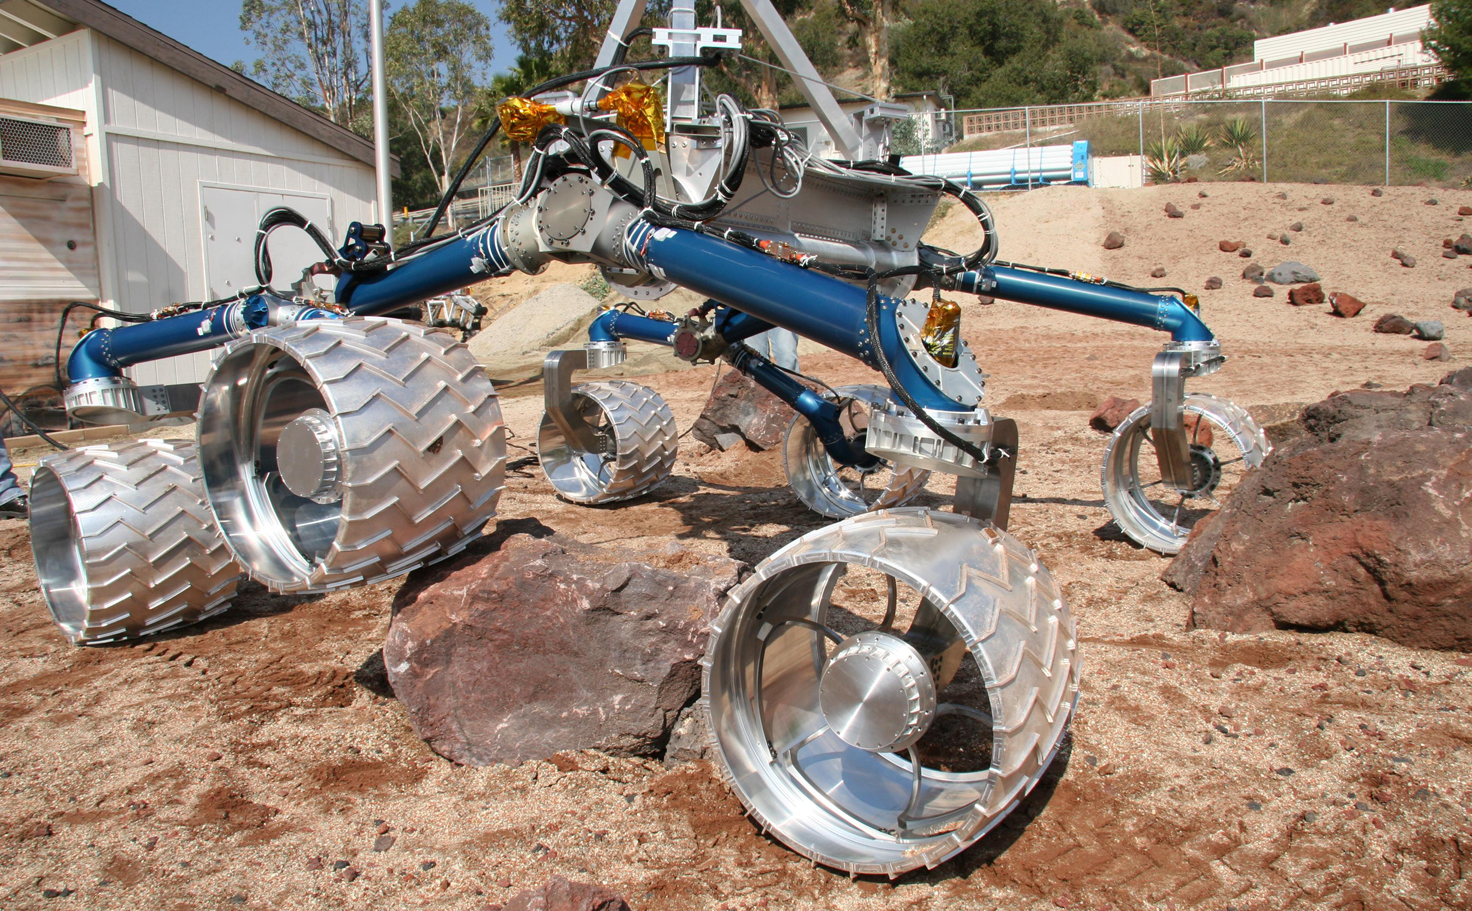 Scarecrow, a mobility-testing model for NASA's Mars Science Laboratory, easily traverses large rocks in the Mars Yard testing area at NASA's Jet Propulsion Laboratory.